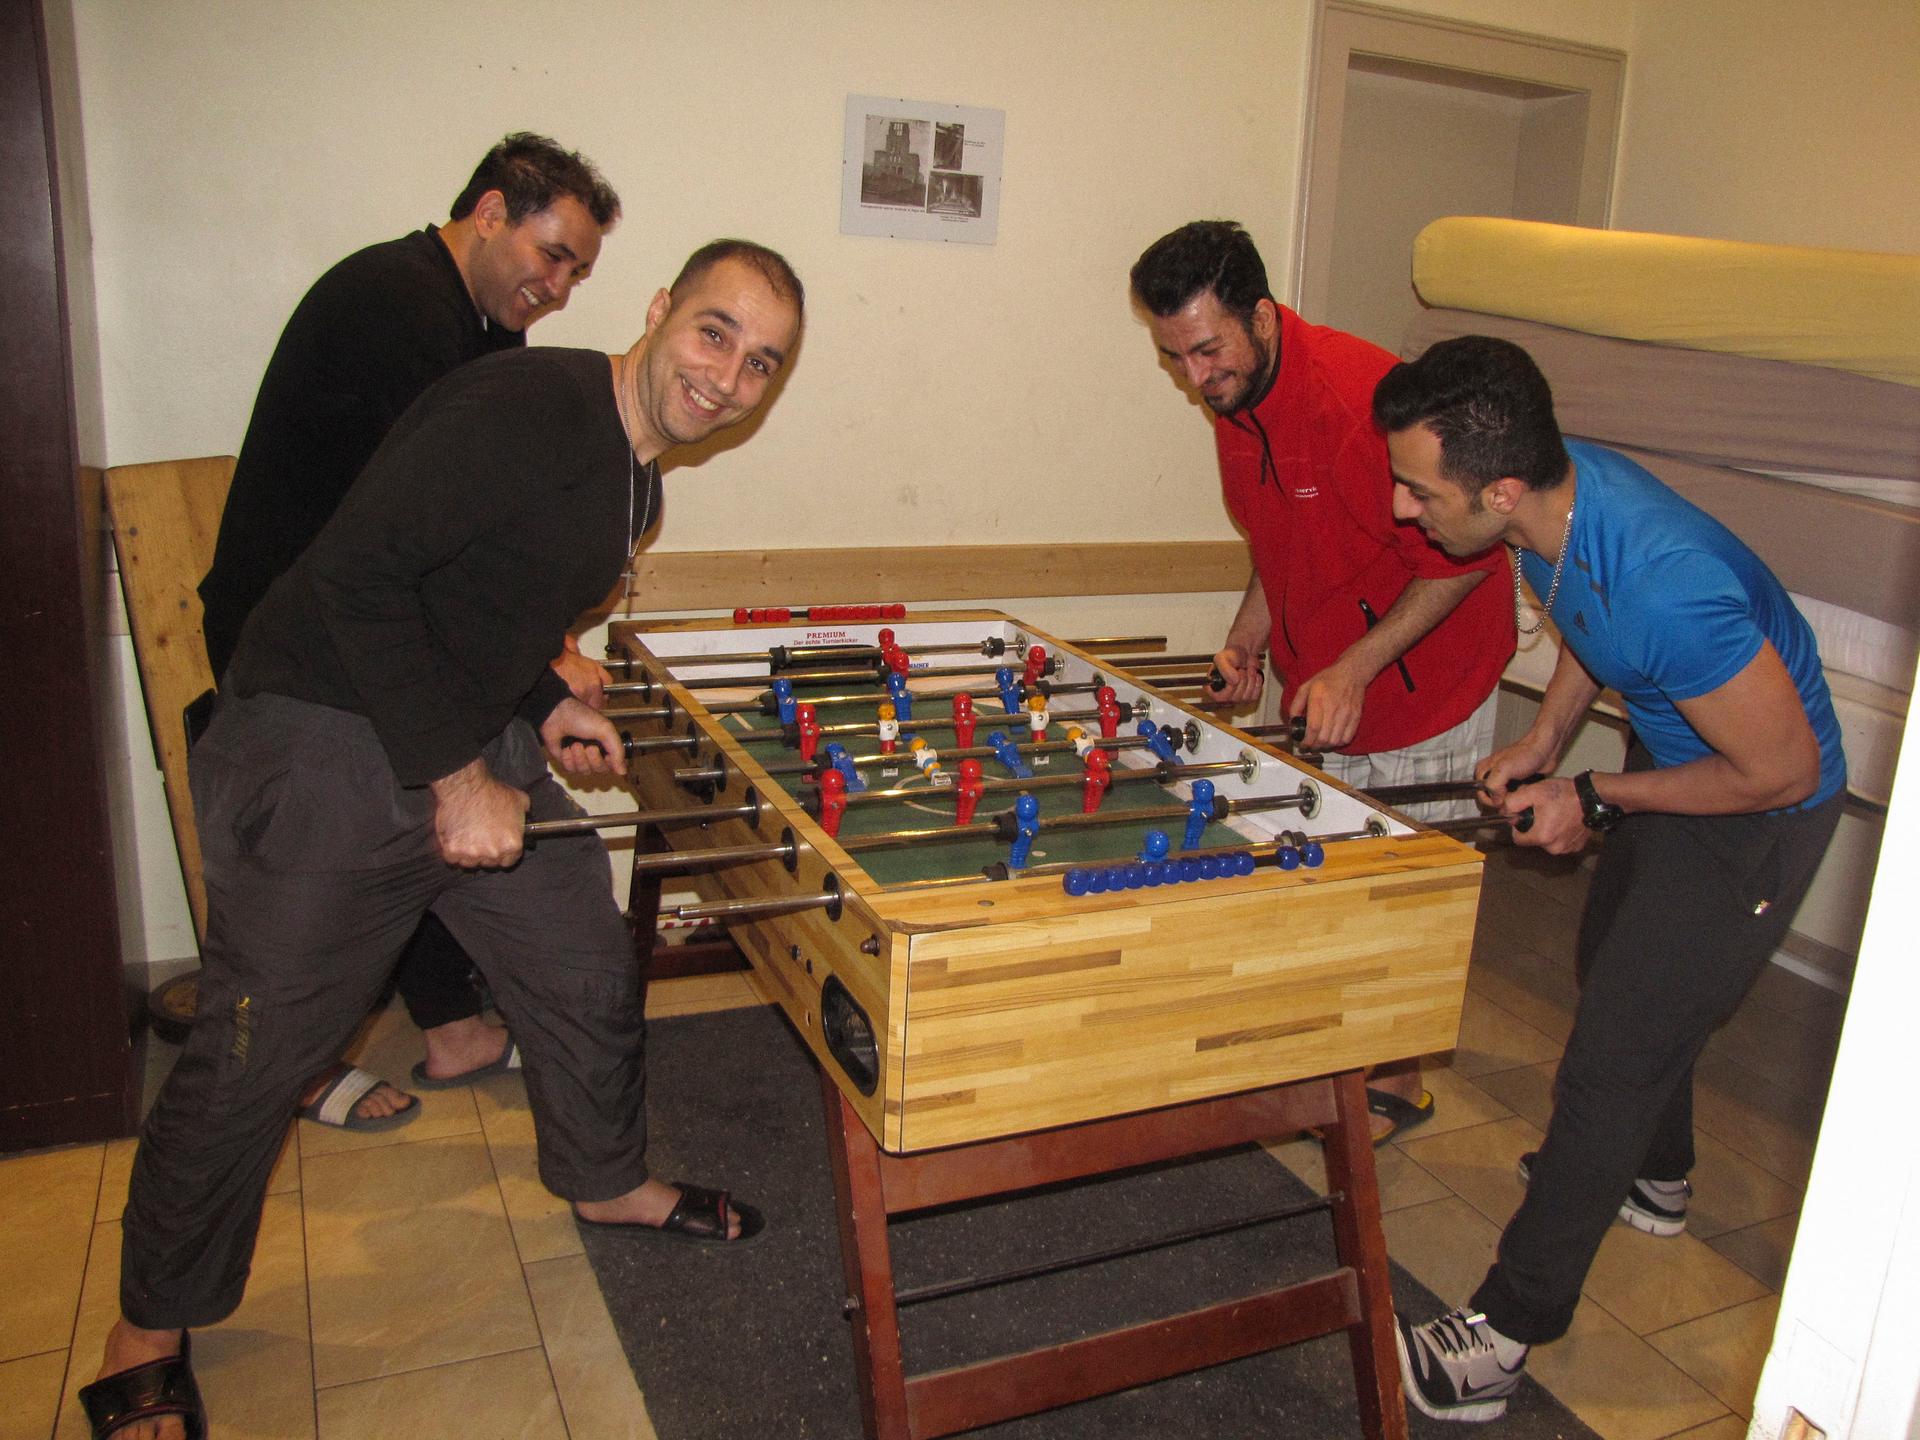 Foosball is one diversion for the residents of the Evangelical Lutheran Trinity Church and Community in Berlin. Left to right: Ali, Amir, Saeed and Ali.